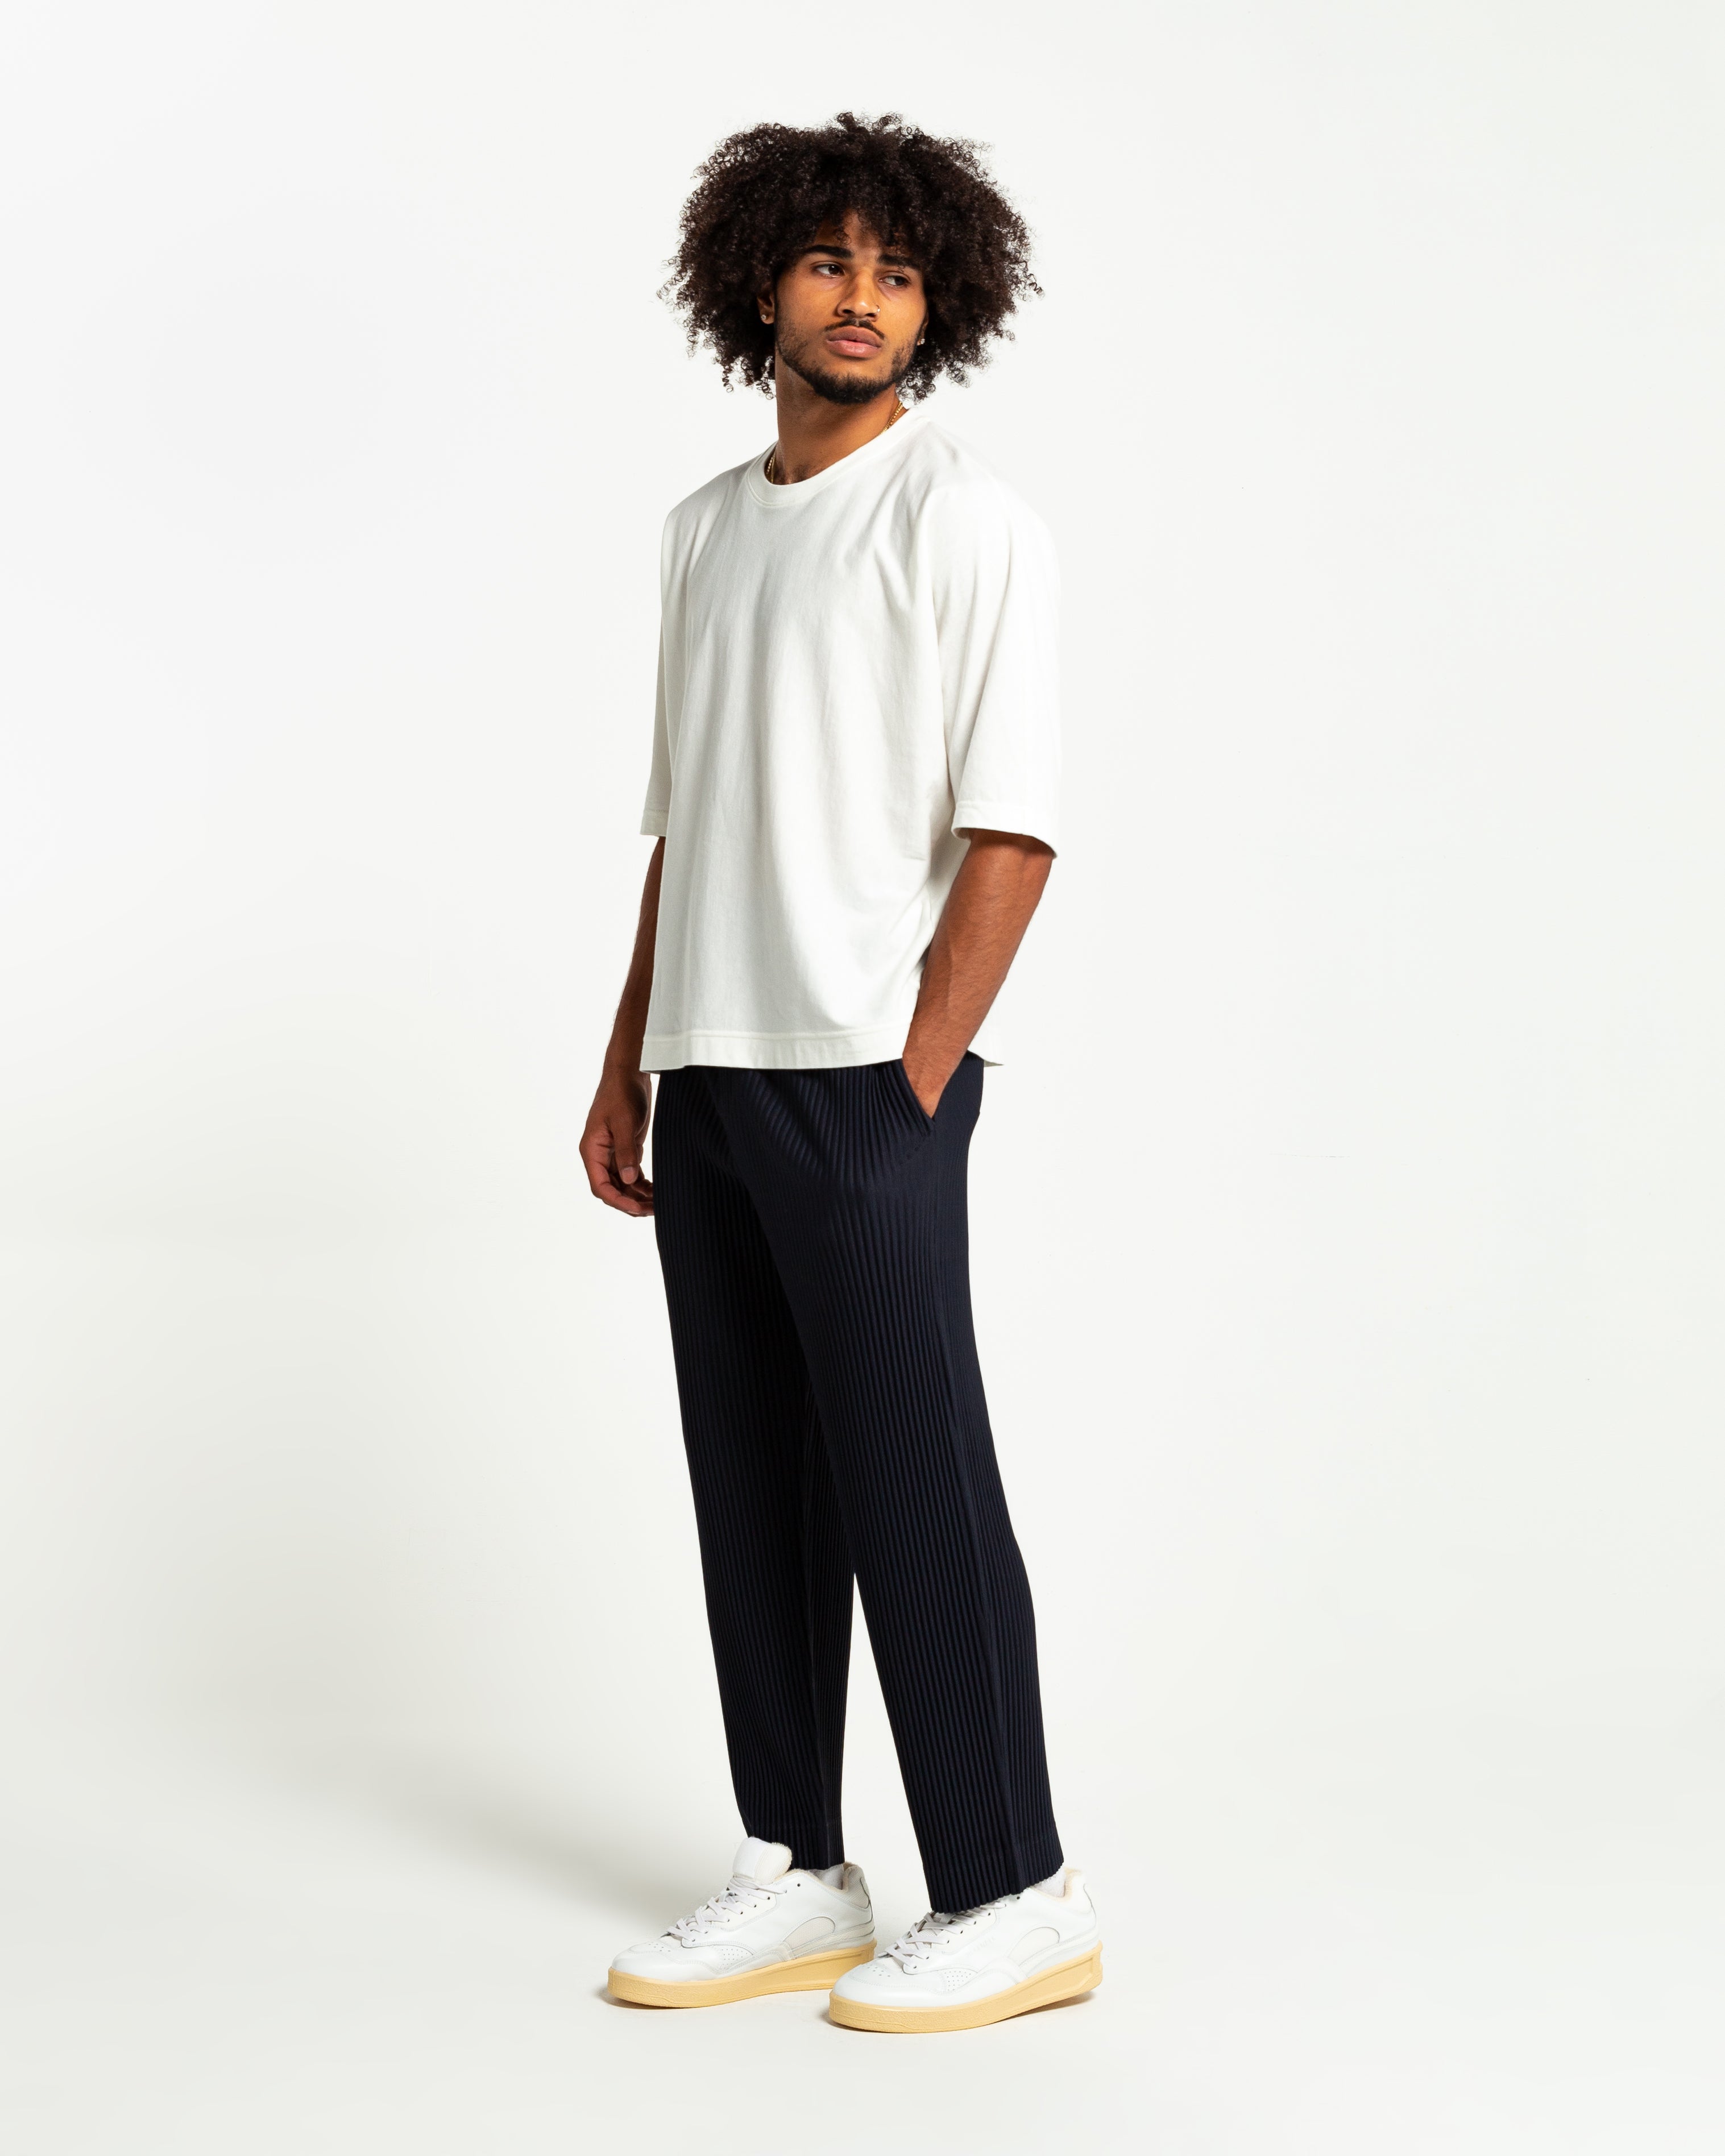 How To Style PLEATED Trousers  Homme Plissé Issey Miyake Review + Styling  + Sizing 